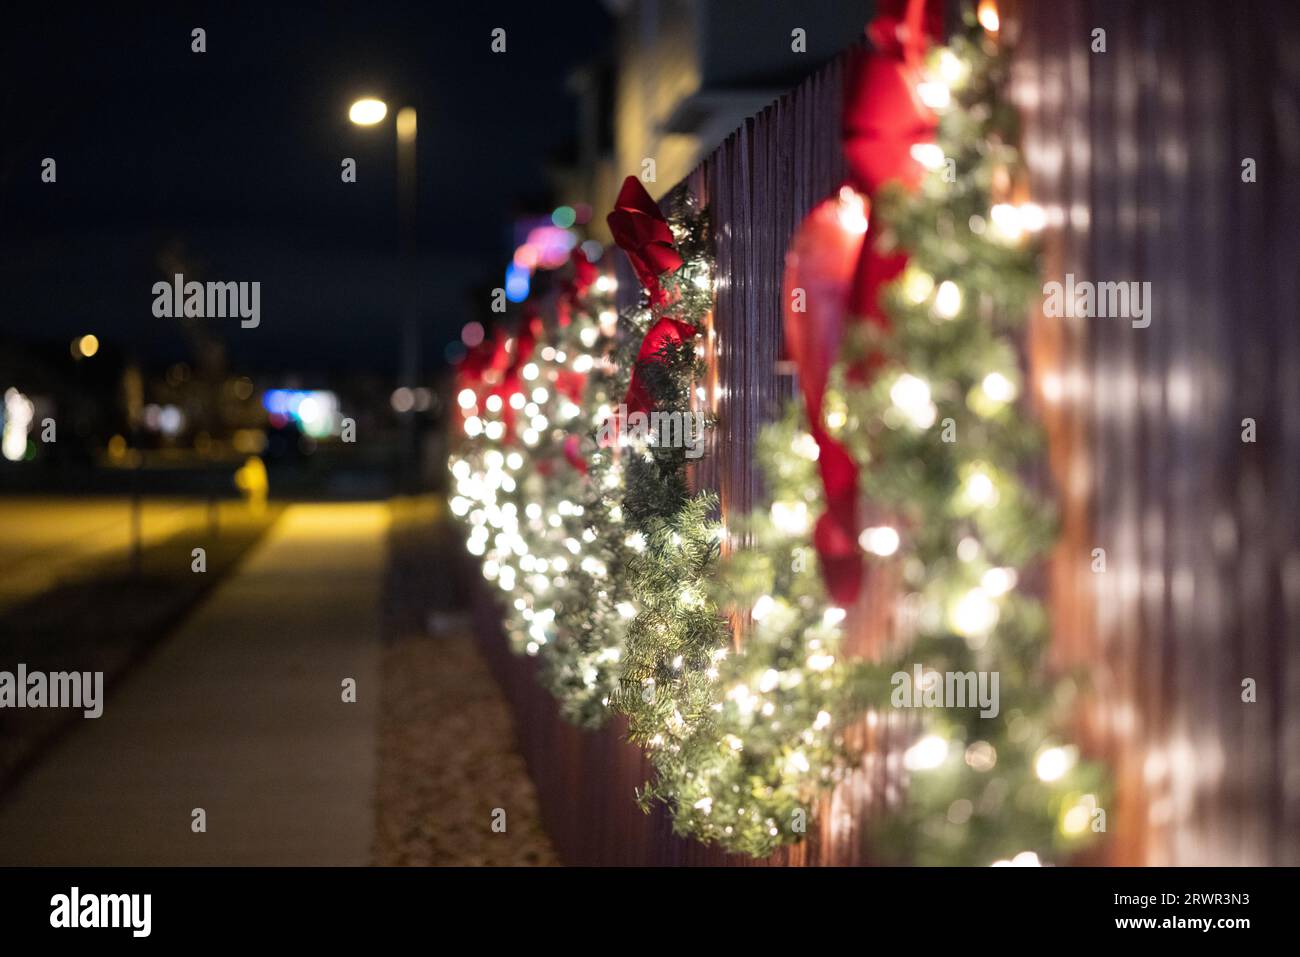 christmas wreaths lit up on a fence Stock Photo